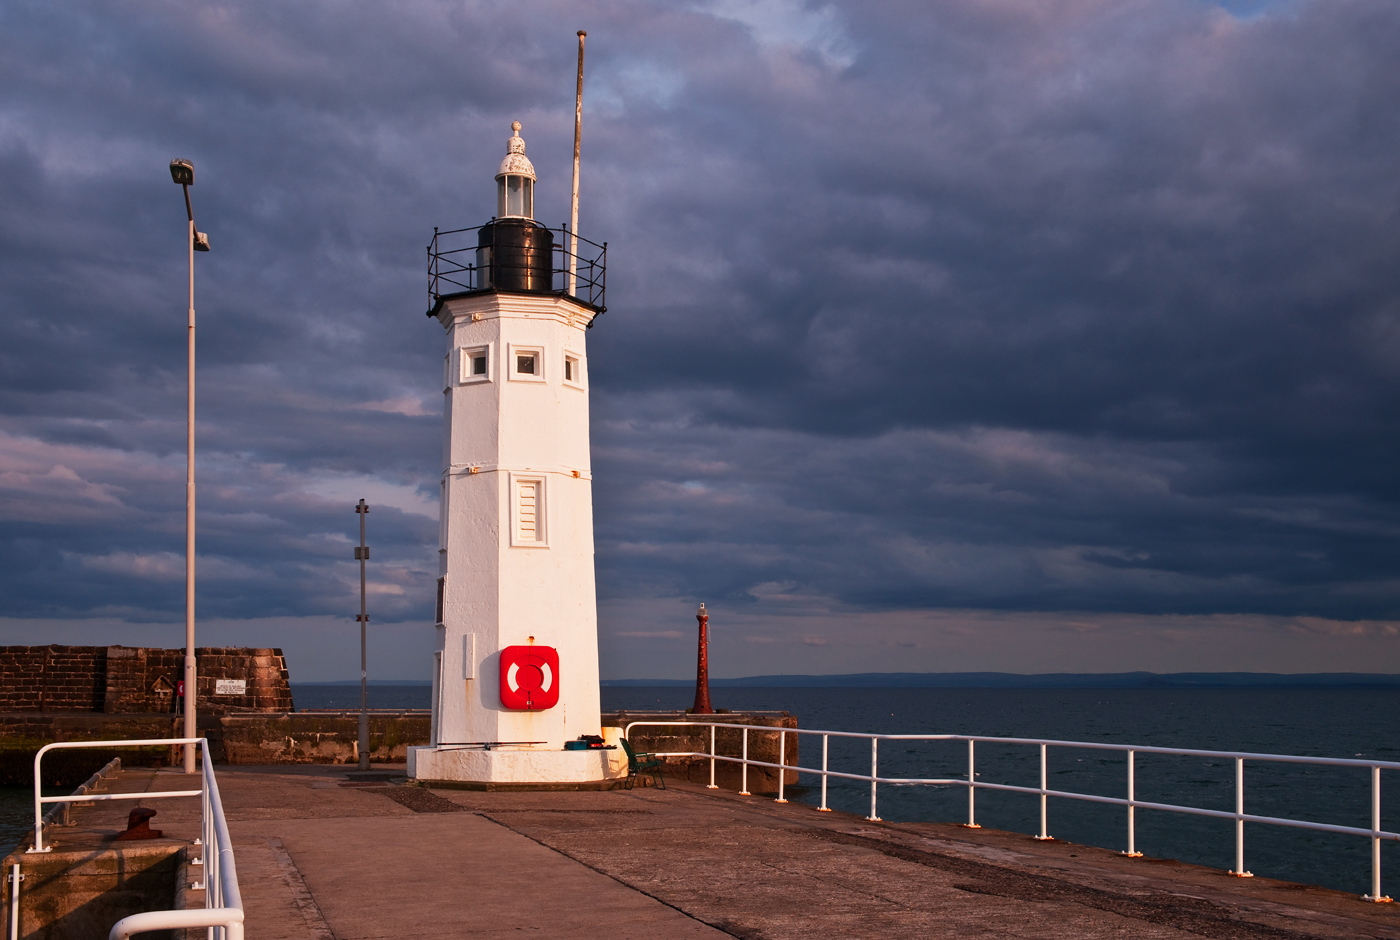 Anstruther Lighthouse